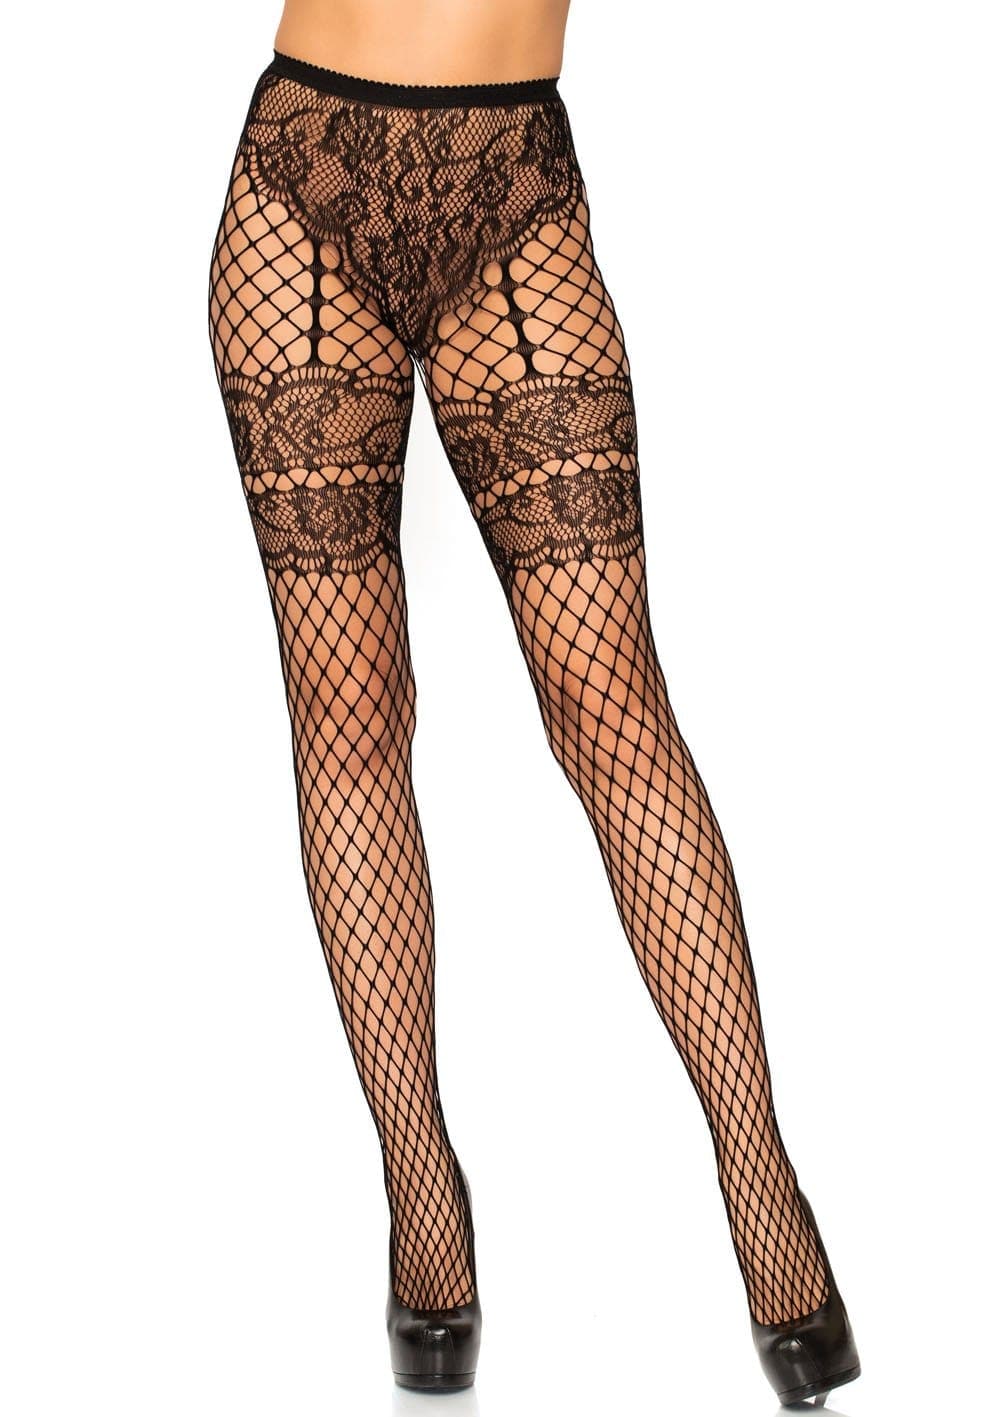 lace french cut faux garter net tights one size black